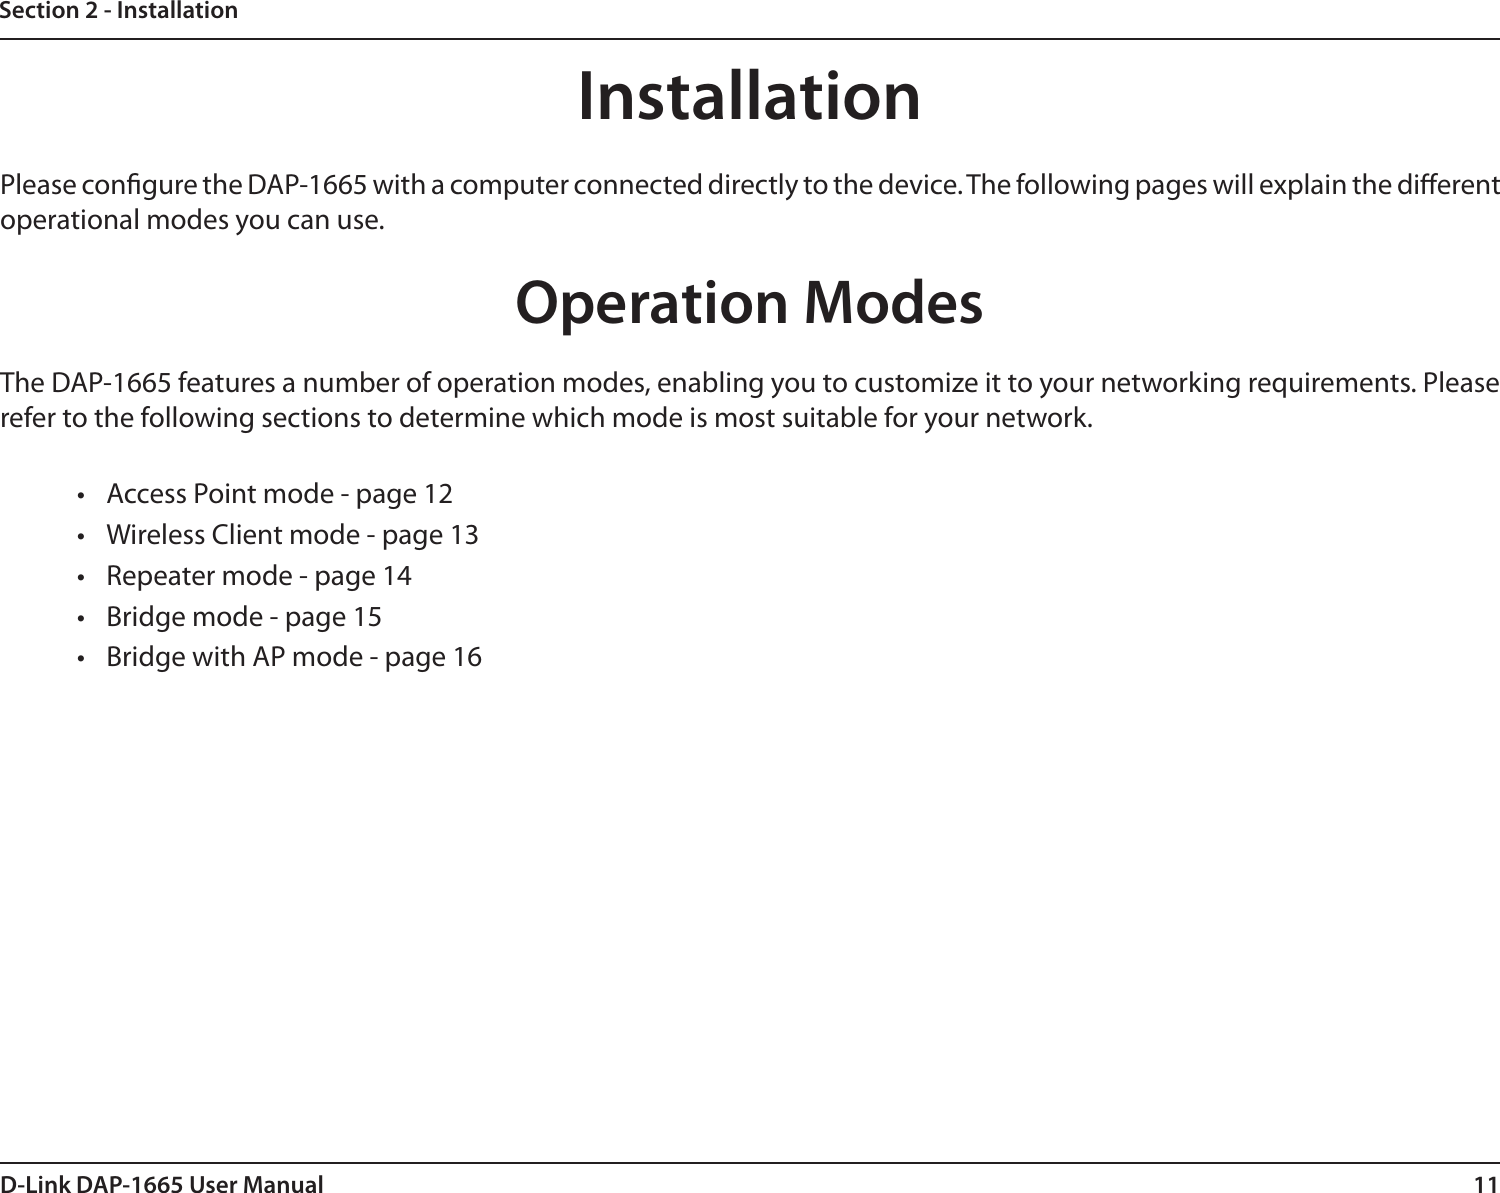 11D-Link DAP-1665 User ManualSection 2 - InstallationInstallationPlease congure the DAP-1665 with a computer connected directly to the device. The following pages will explain the dierent operational modes you can use. Operation ModesThe DAP-1665 features a number of operation modes, enabling you to customize it to your networking requirements. Please refer to the following sections to determine which mode is most suitable for your network.•  Access Point mode - page 12•  Wireless Client mode - page 13•  Repeater mode - page 14•  Bridge mode - page 15•  Bridge with AP mode - page 16